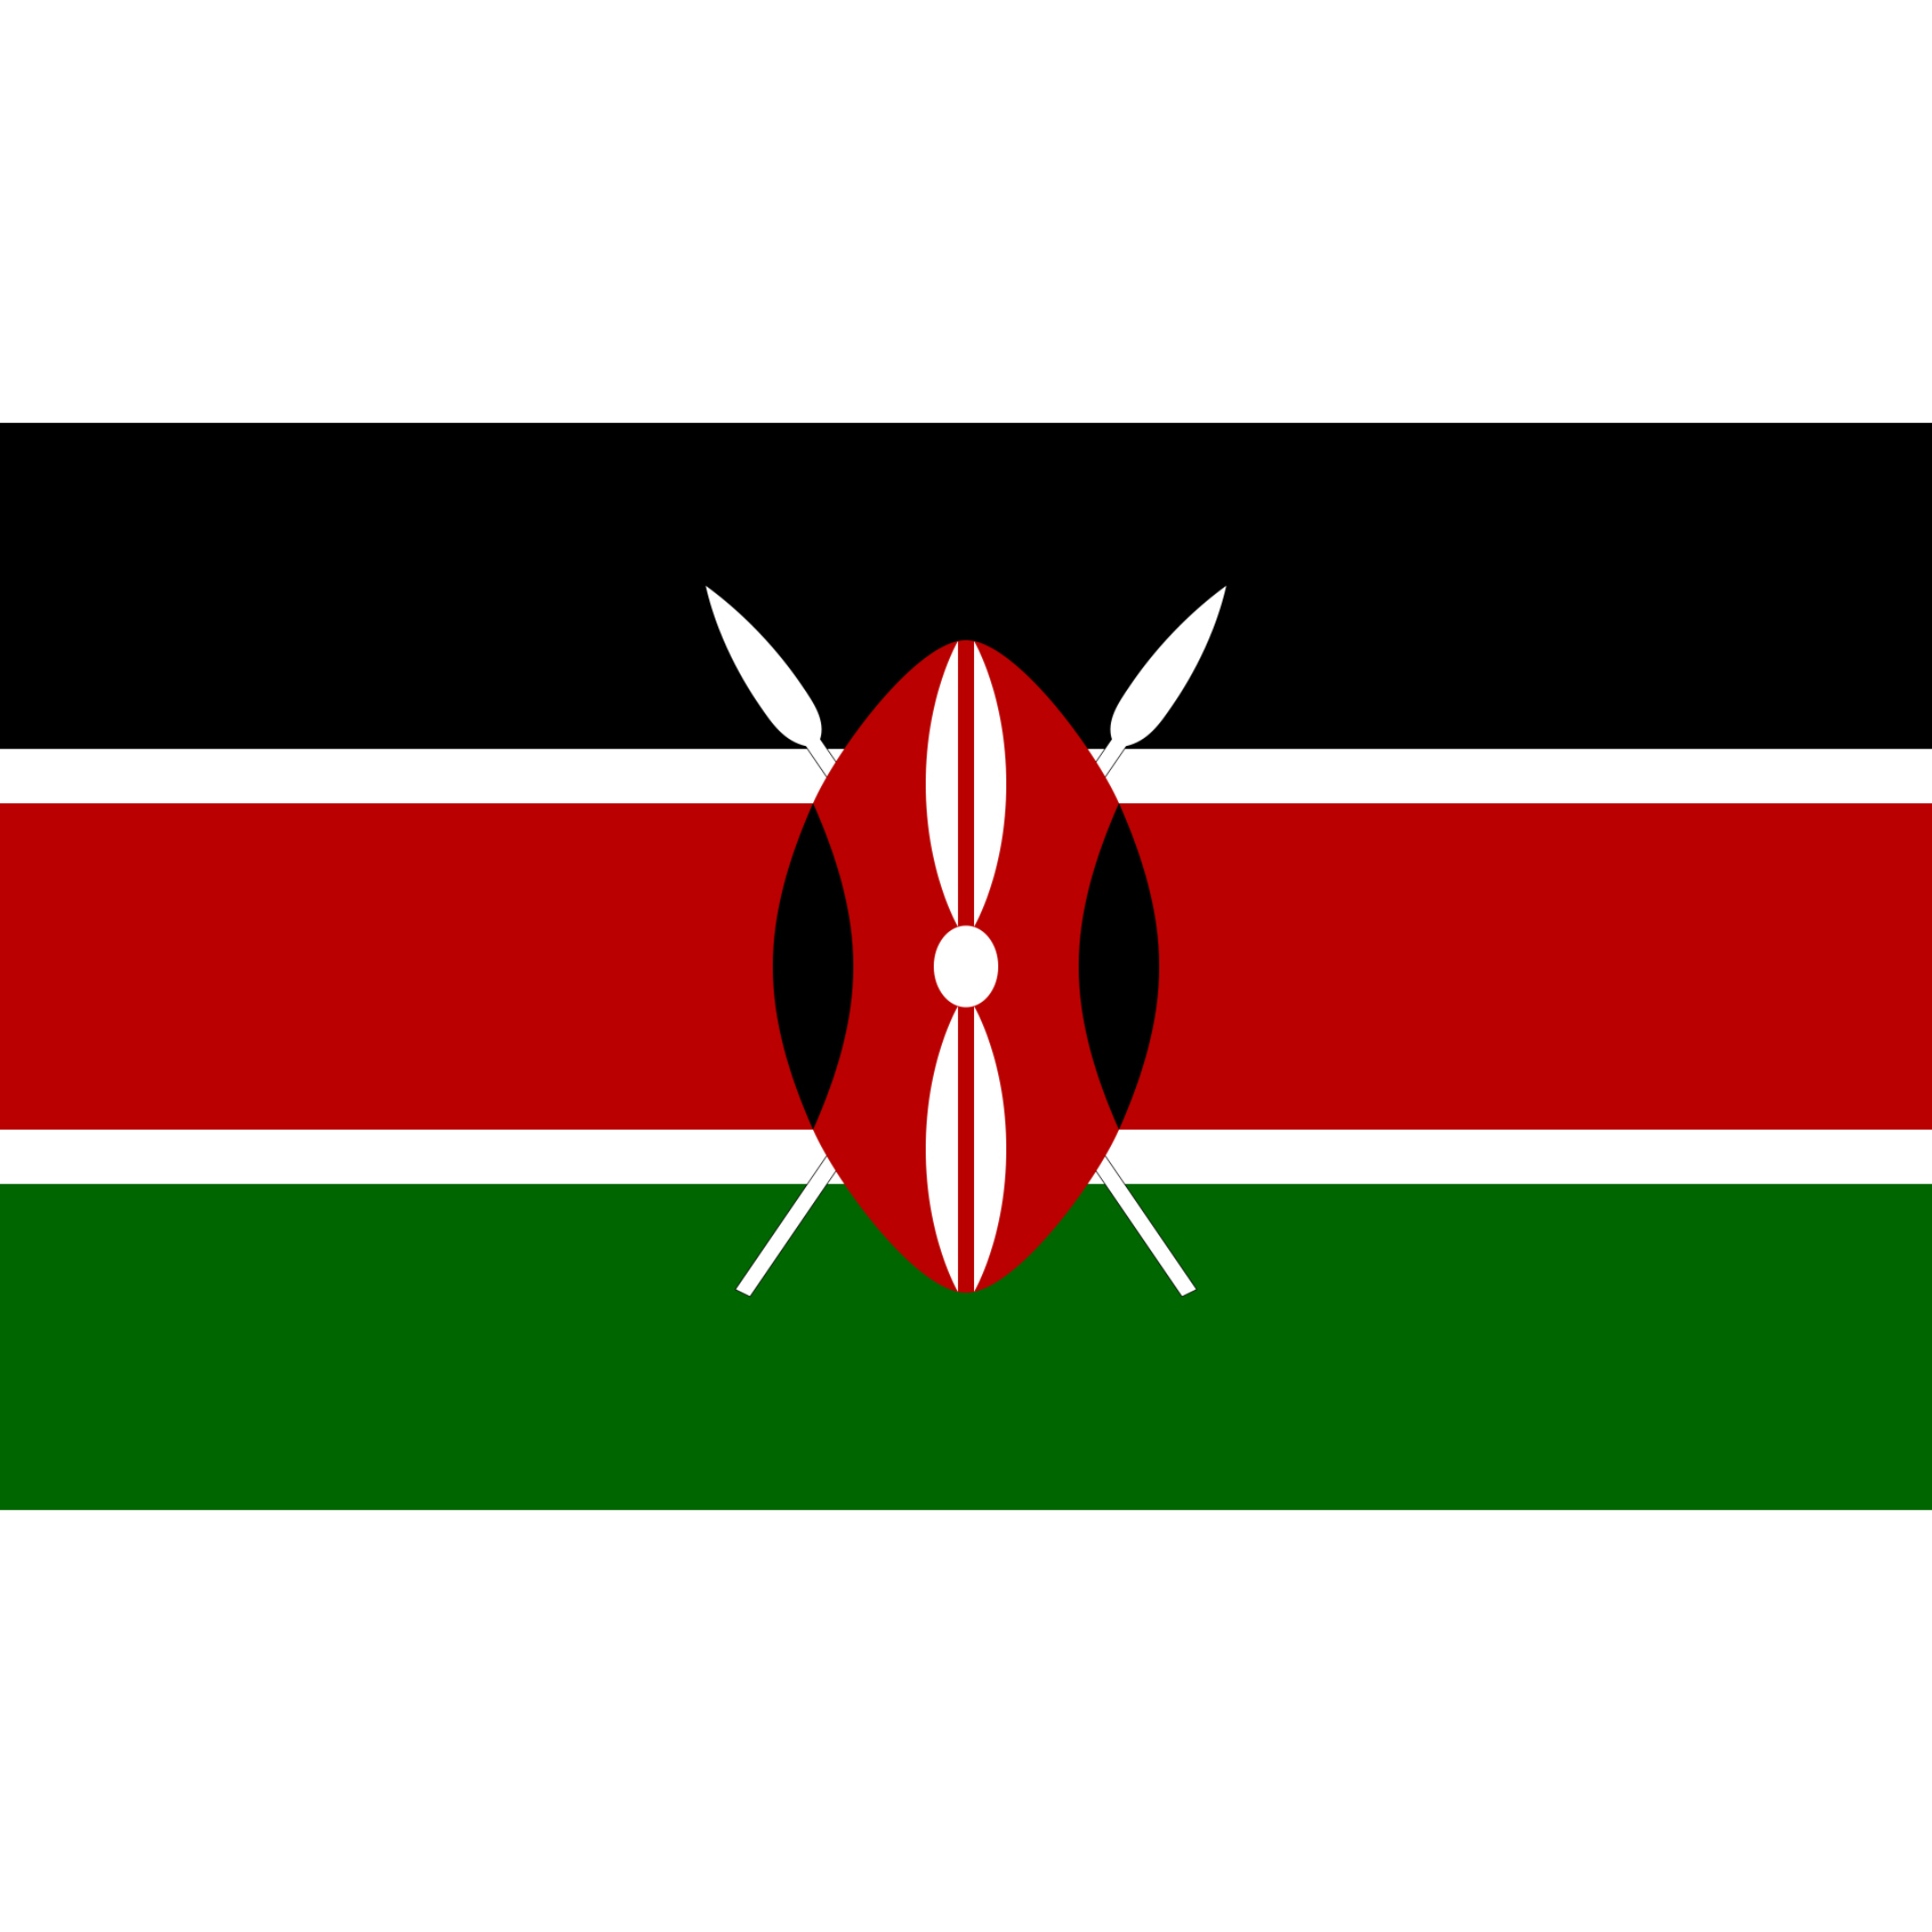 Kenya's flag has 3 horizontal black, red, and green bands separated by thin white lines with a shield and two crossed spears.